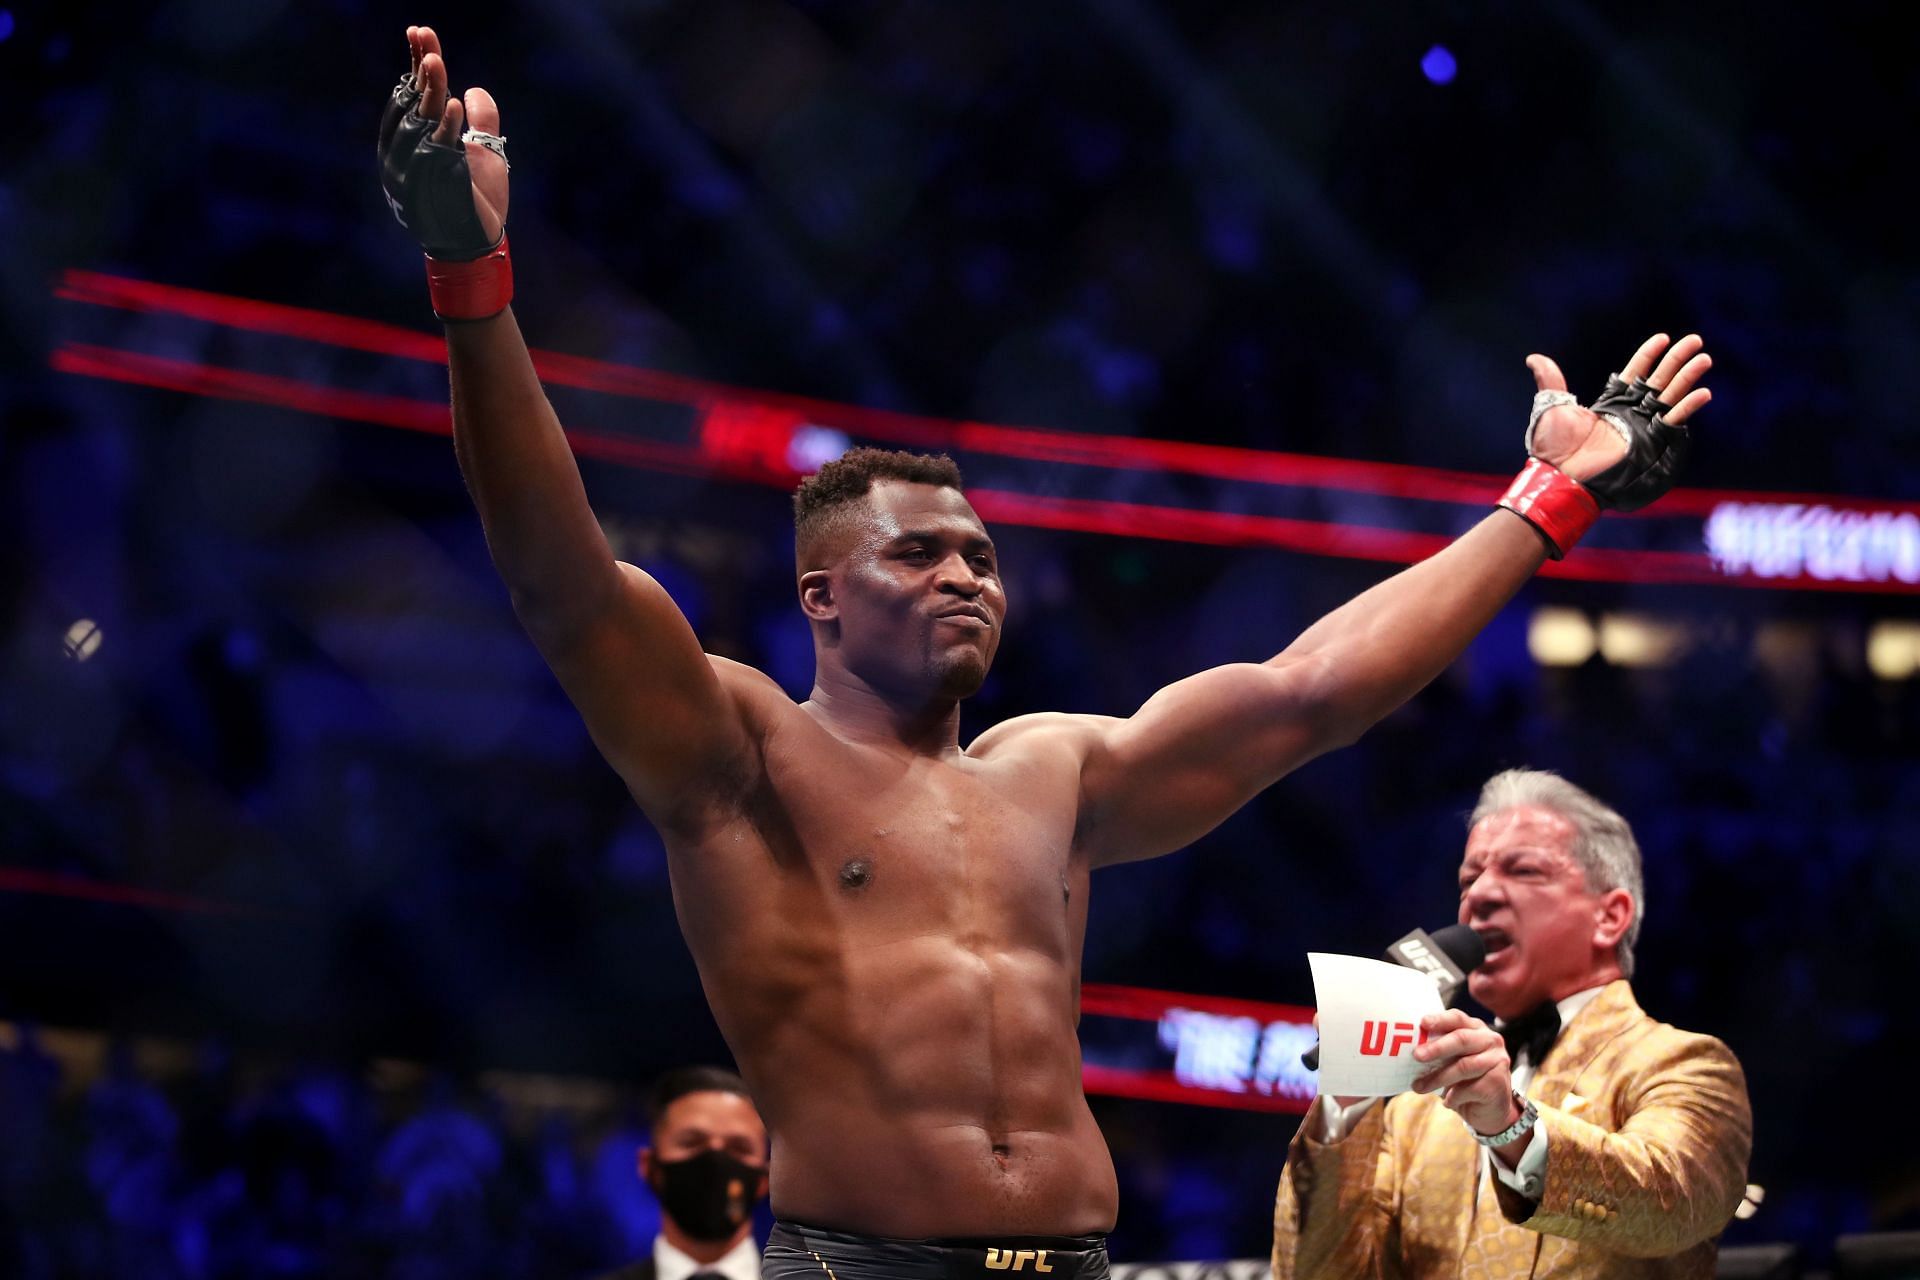 Francis Ngannou definitely has the potential to become the greatest heavyweight of all time